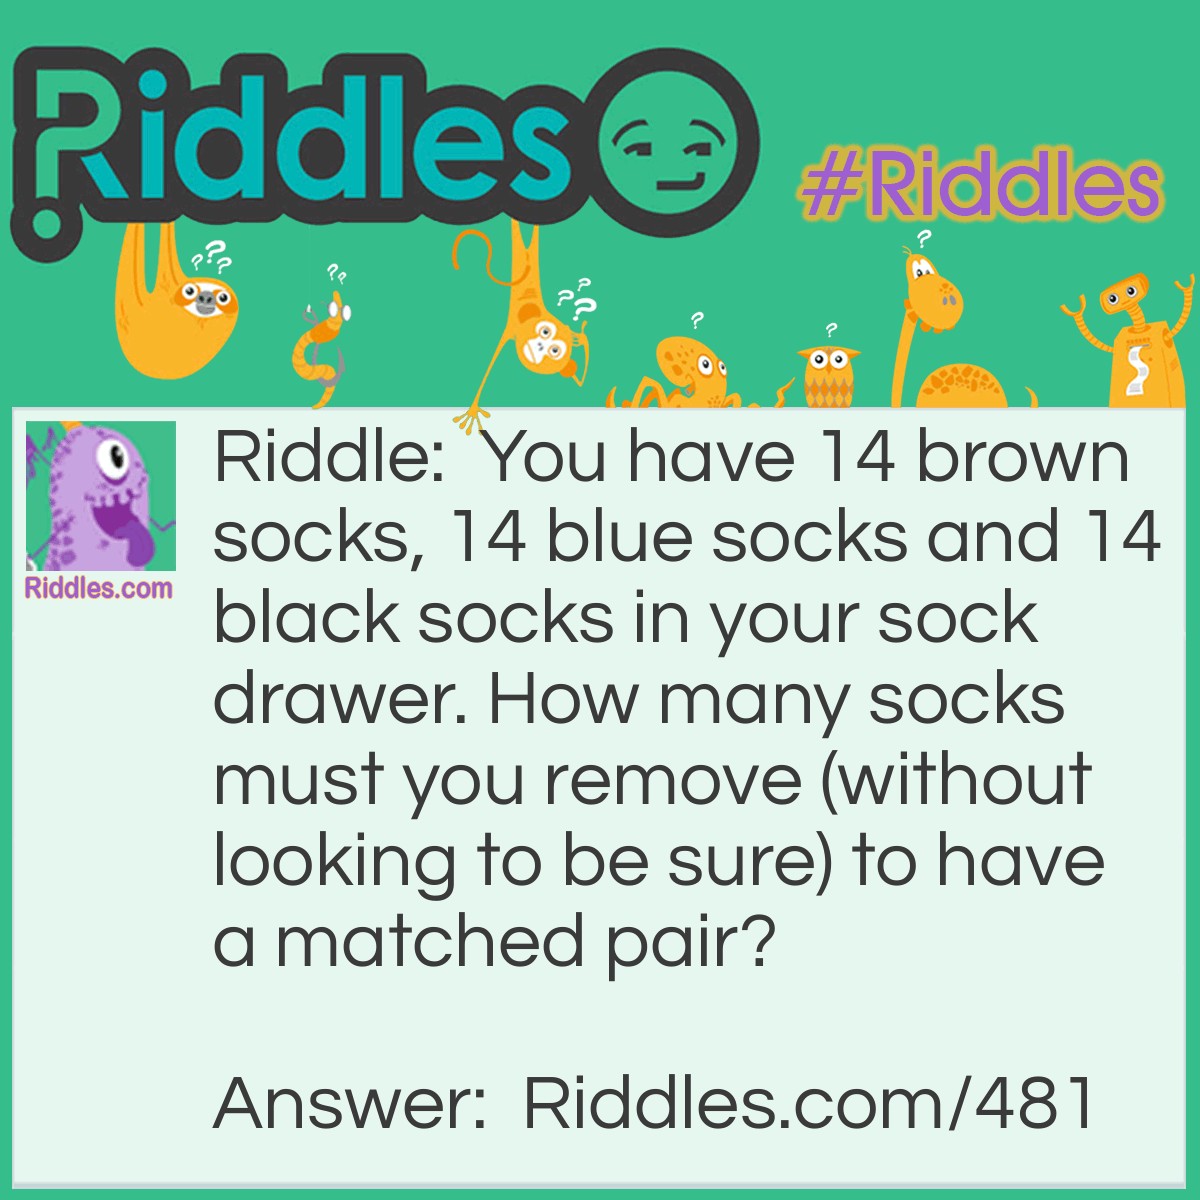 Riddle: You have 14 brown socks, 14 blue socks and 14 black socks in your sock drawer. How many socks must you remove (without looking to be sure) to have a matched pair? Answer: Four. You will have a pair of one color or another.